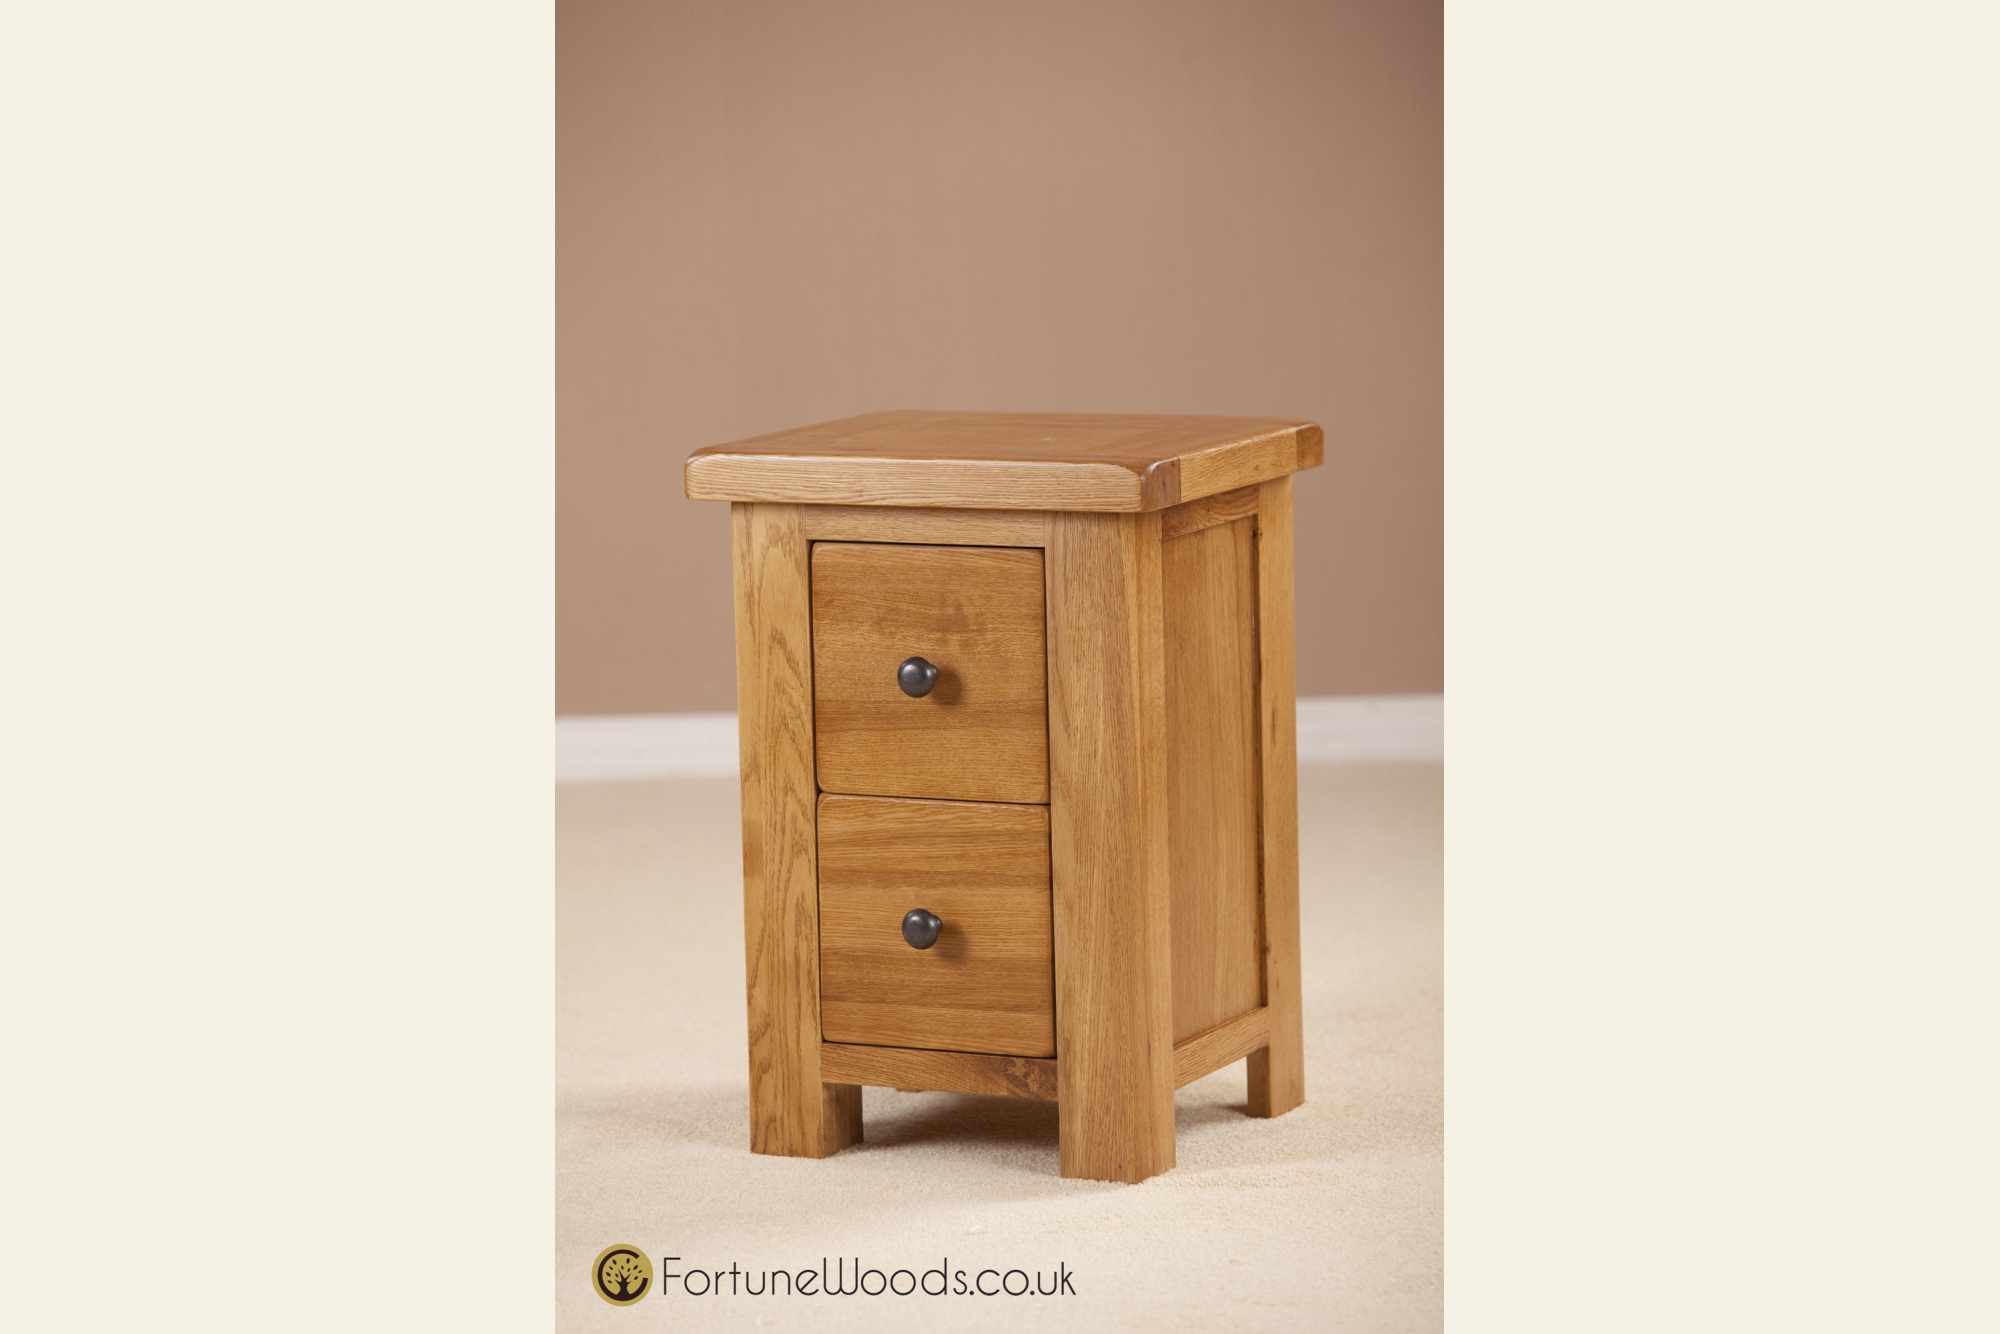 Fortune Woods Cotswold 2 Drawer Bedside